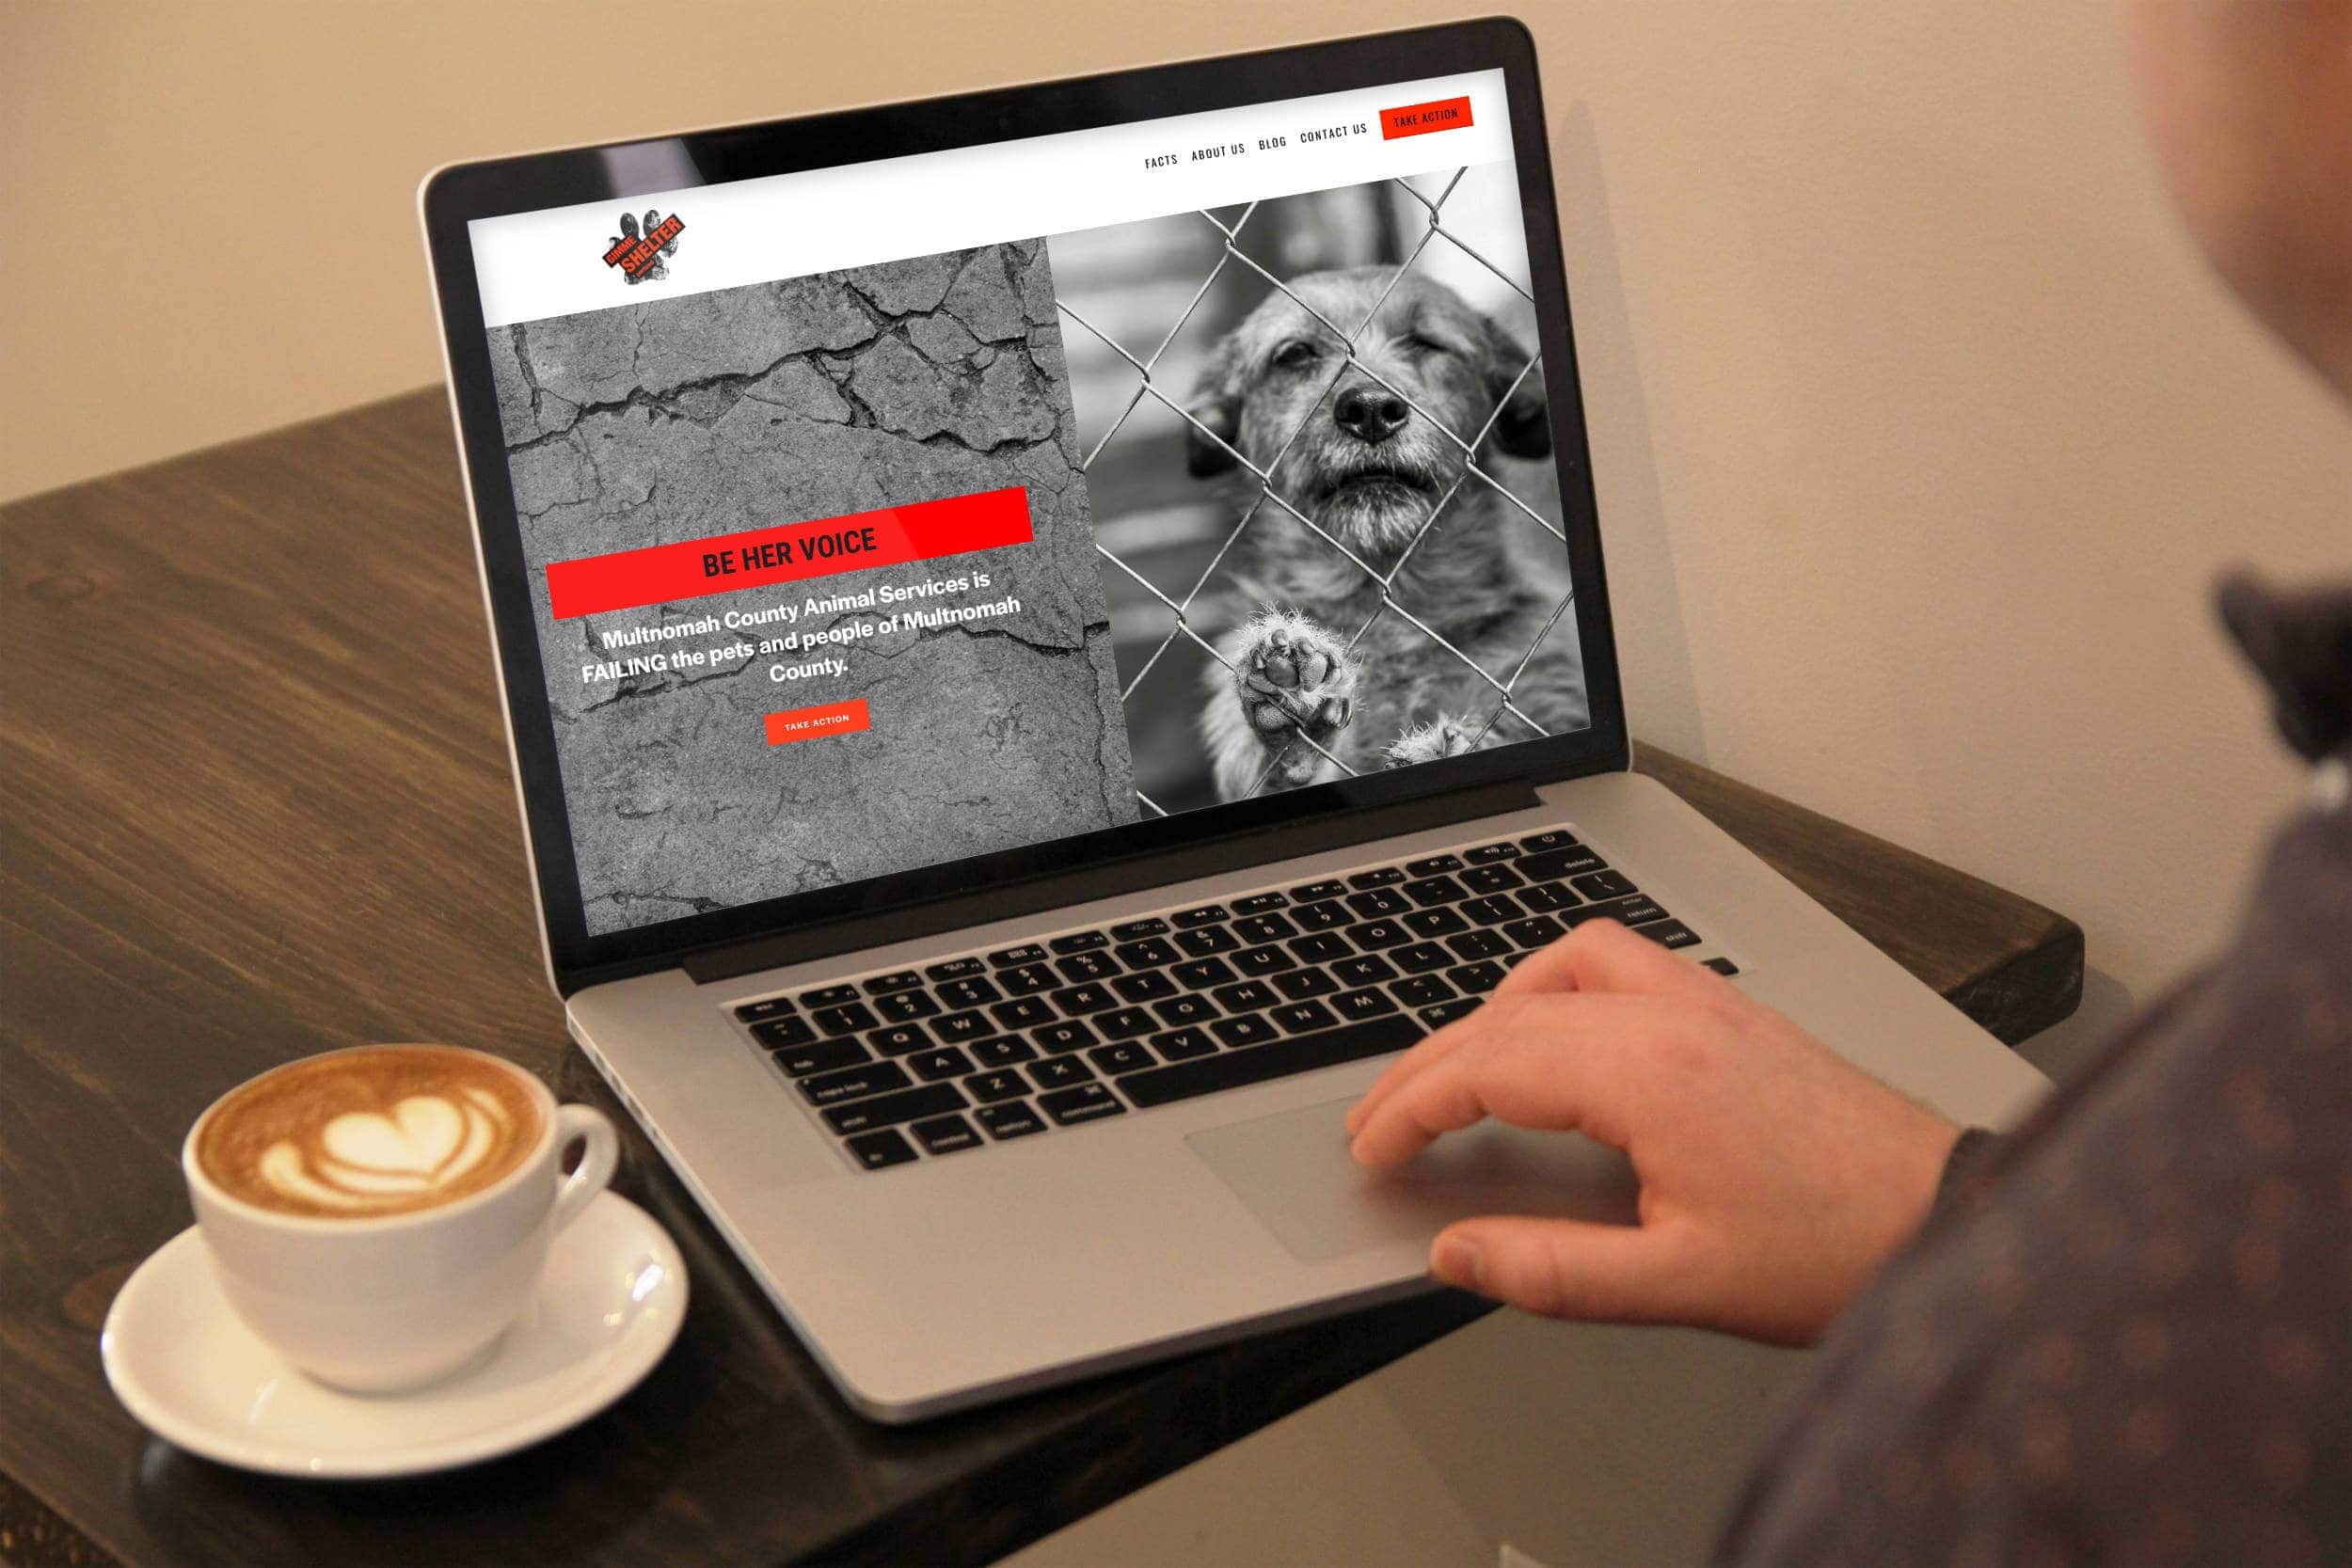  Gimme Shelter - This Design in a Day™ project is a nimble website for a campaign to improve conditions for shelter animals. The homepage tells the story, while the other pages funnel visits to take action. The blog is an ongoing educational and resource project ensuring the site is a living entity. 